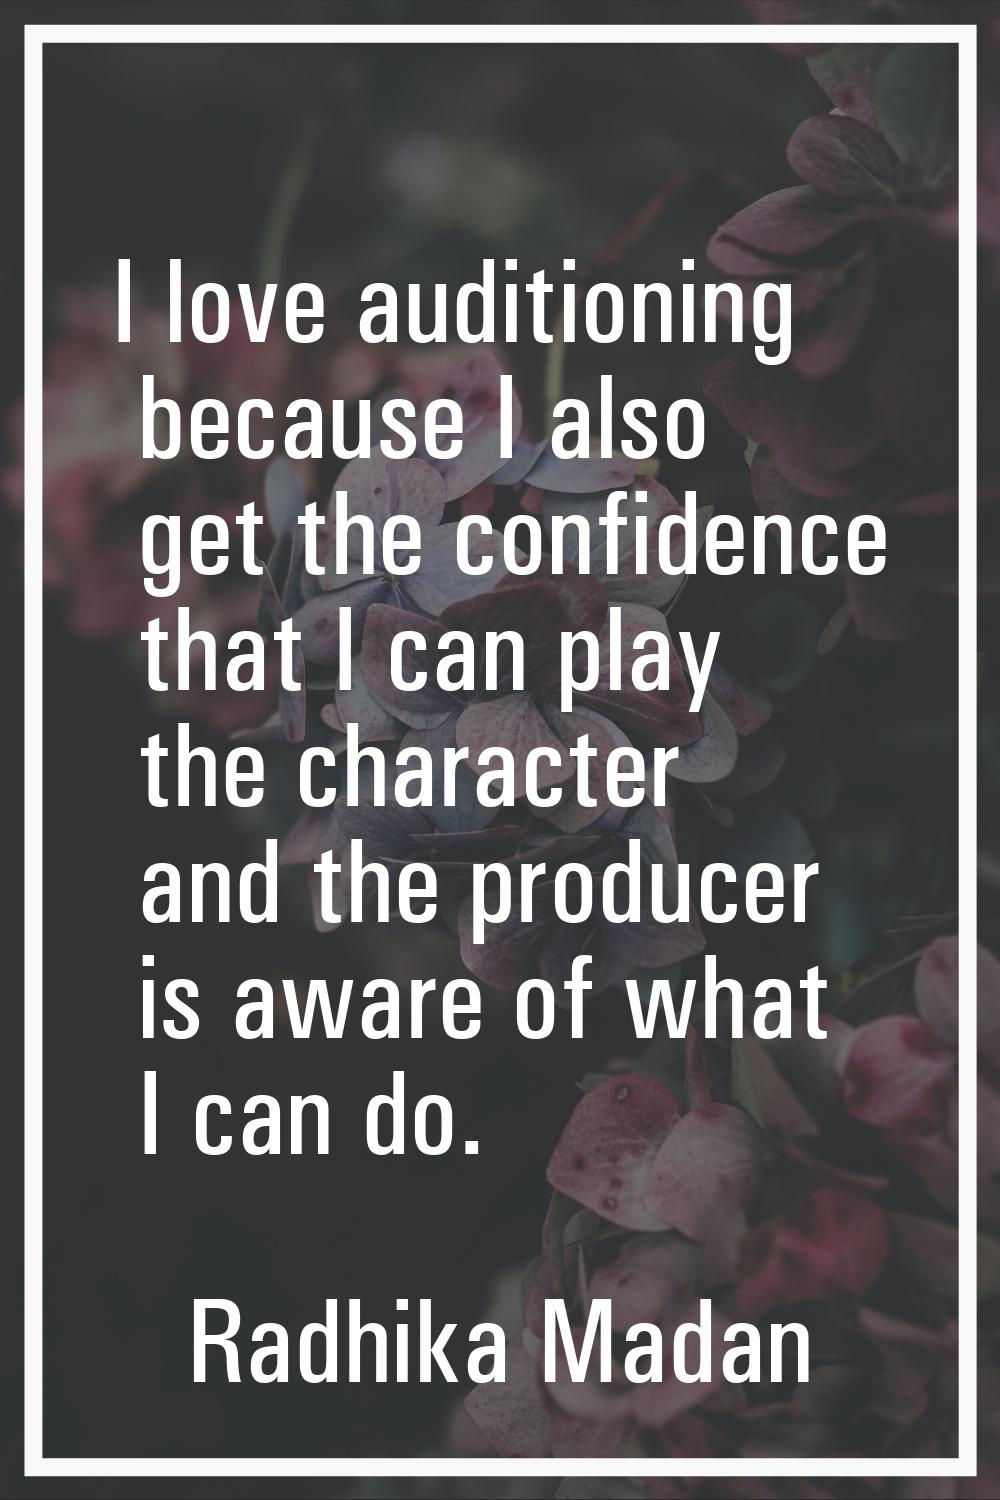 I love auditioning because I also get the confidence that I can play the character and the producer